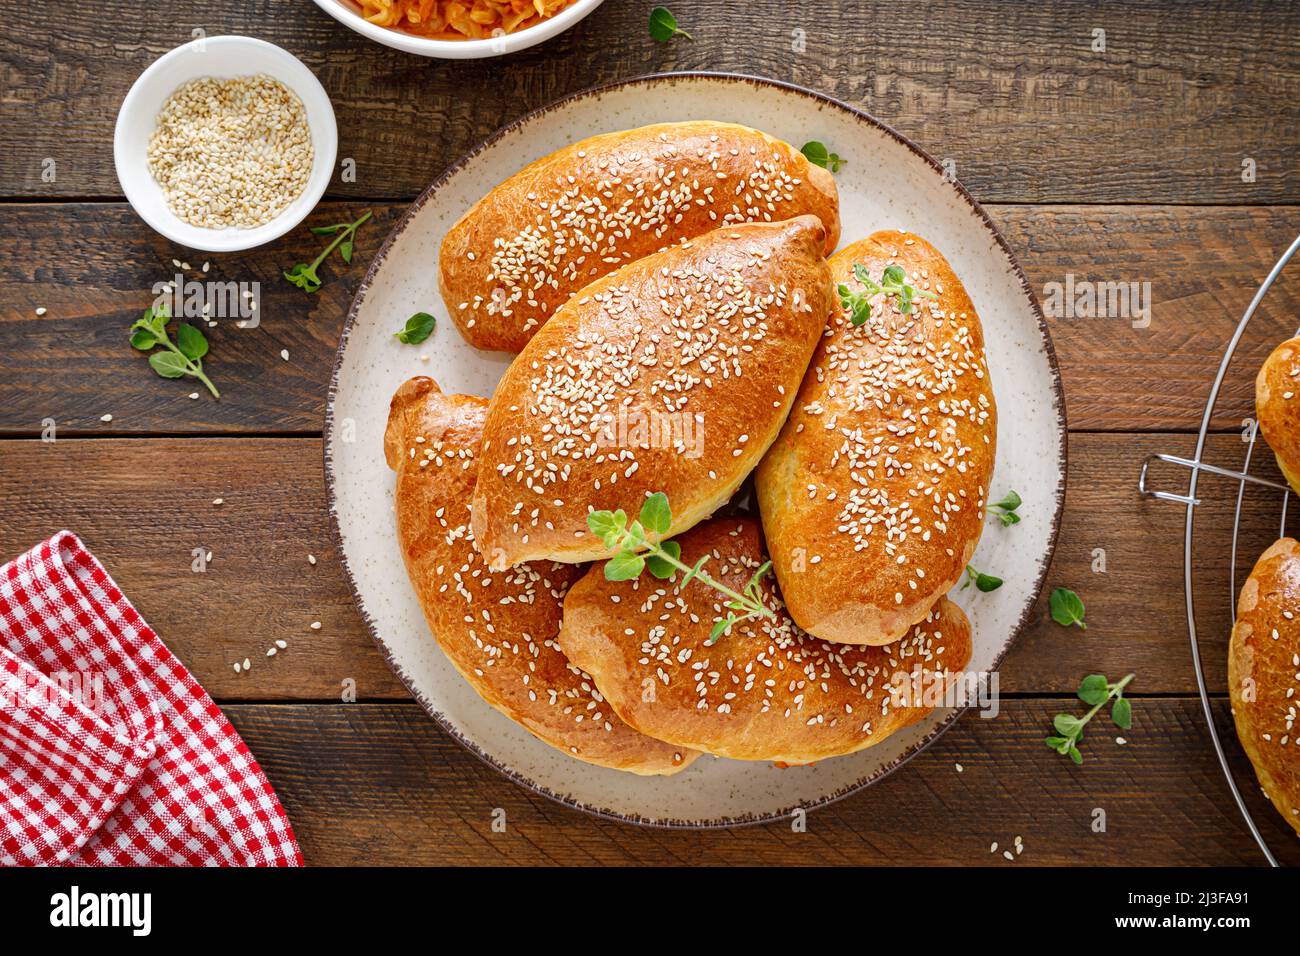 Homemade baked pies or patties stuffed with cabbage on wooden background. Top view Stock Photo